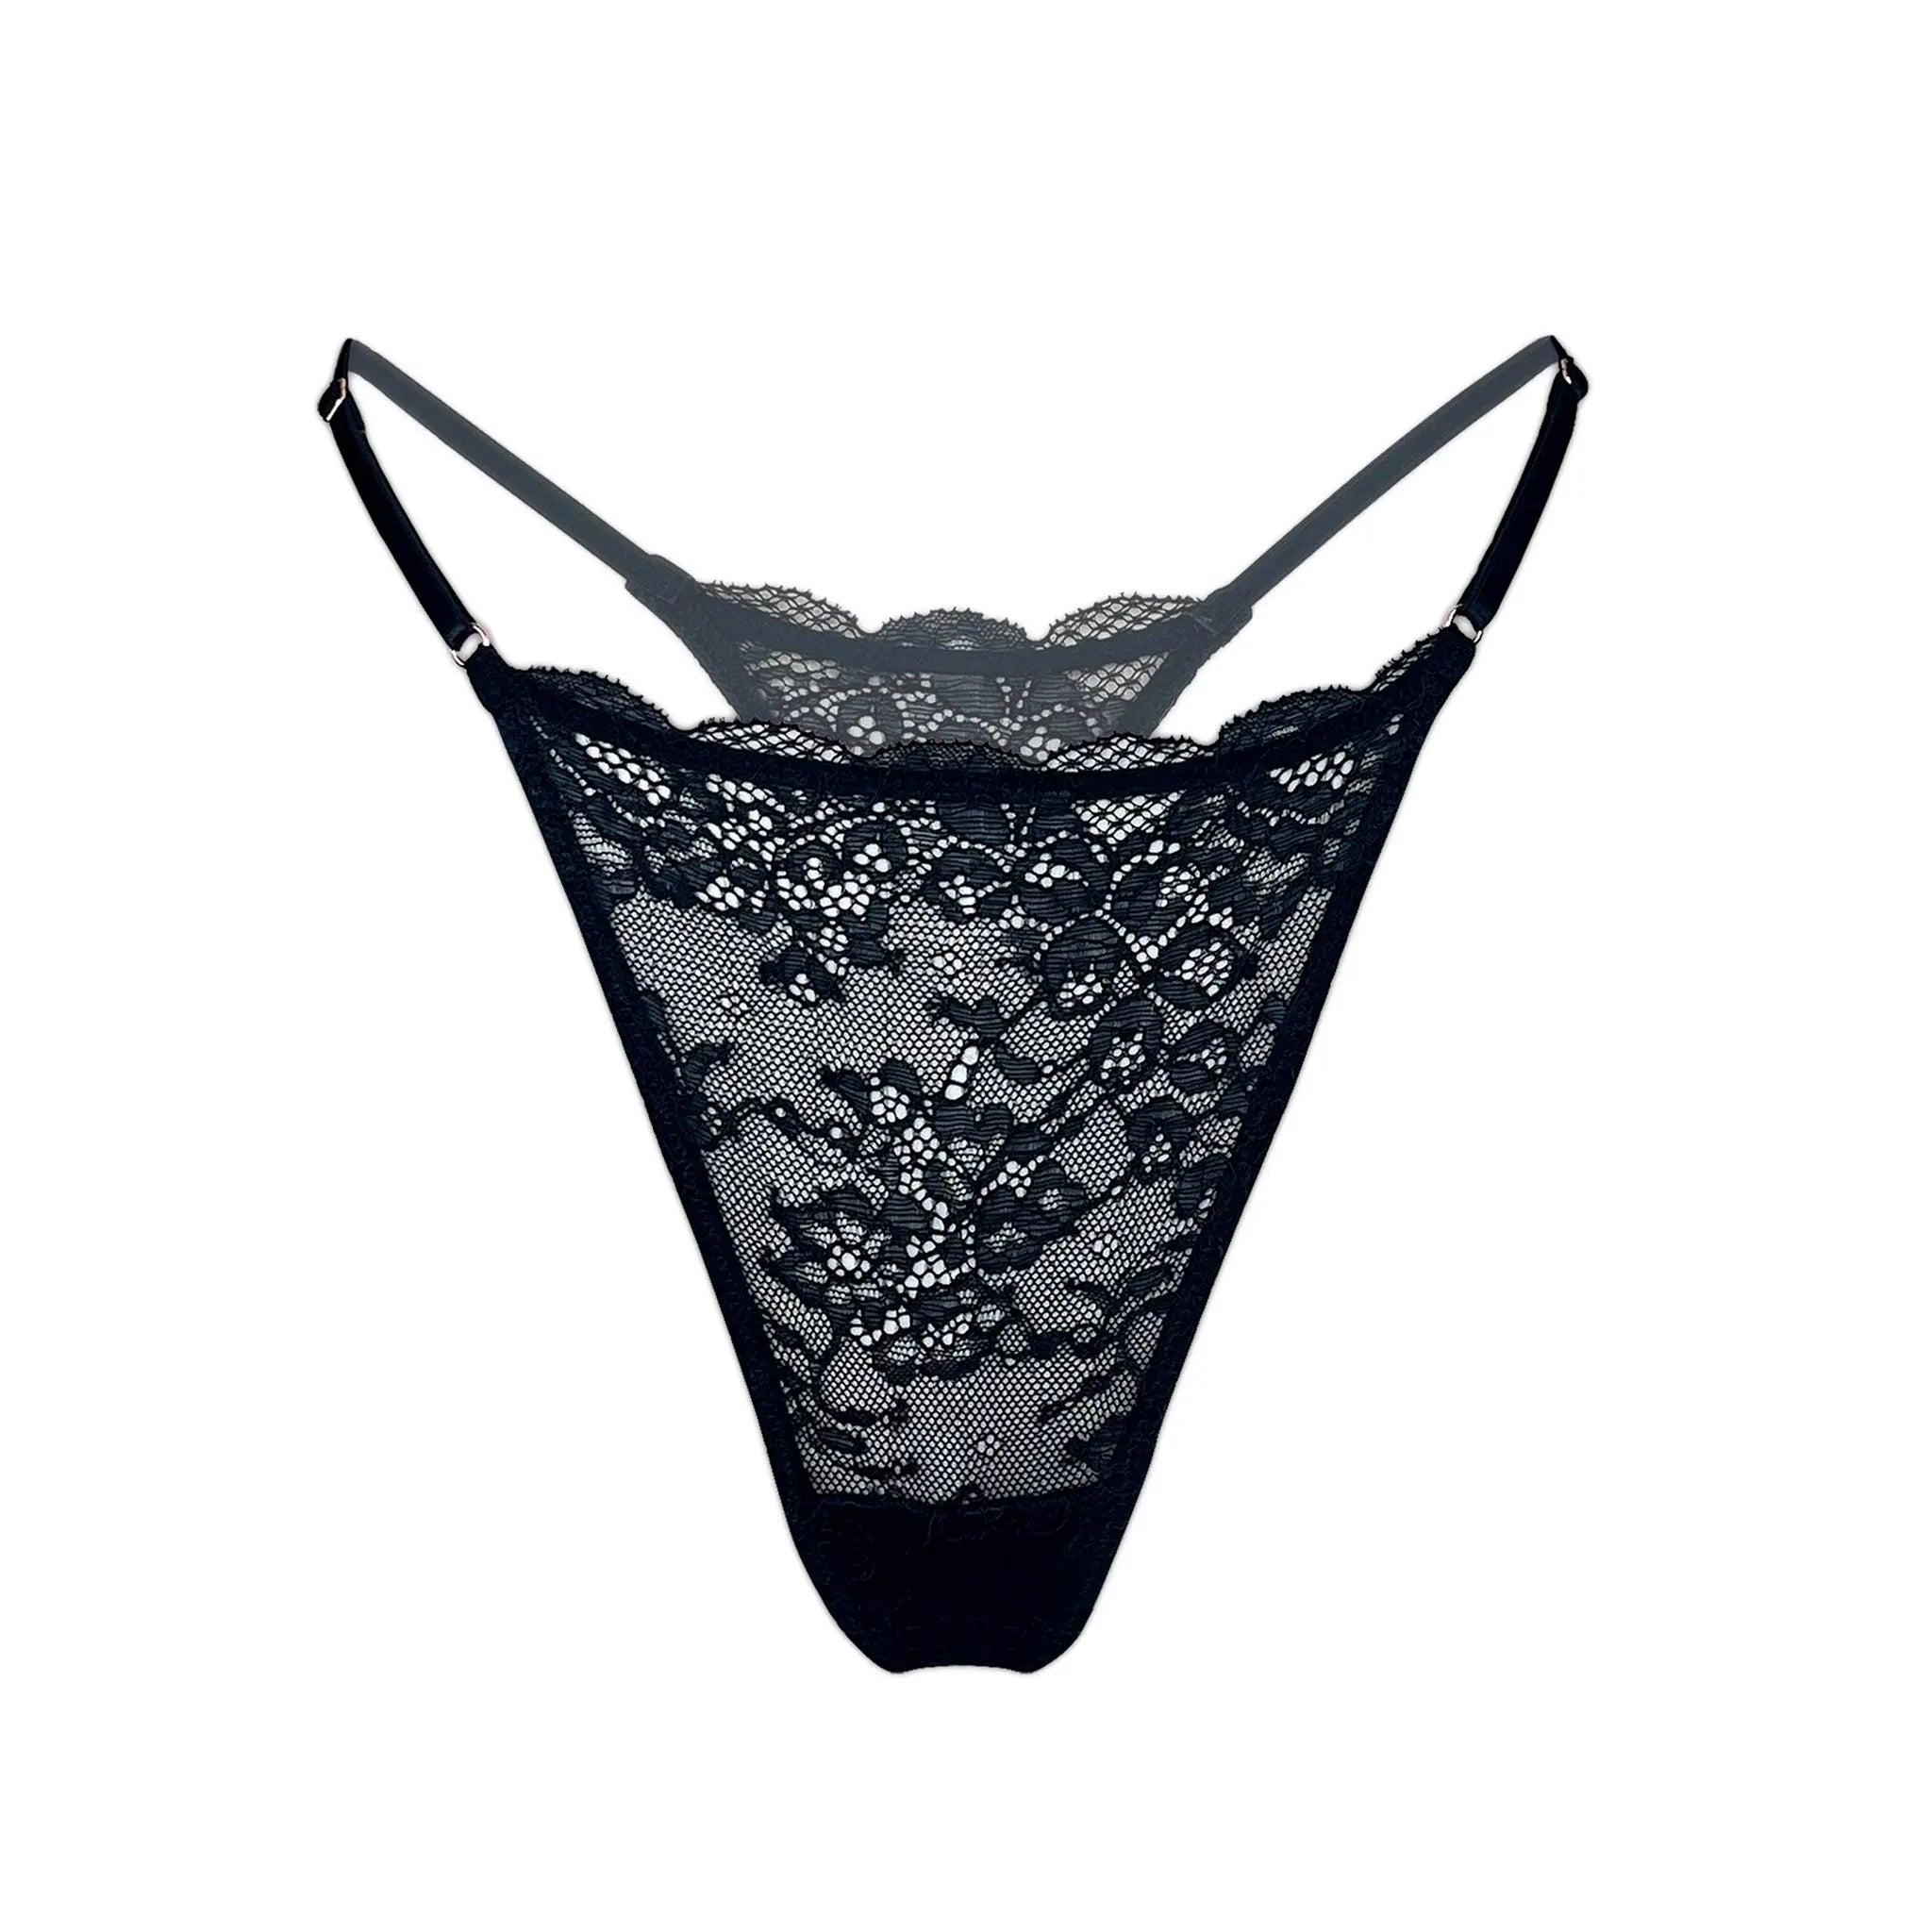 Wholesale undergarments import - Offering Lingerie For The Curvy Lady 